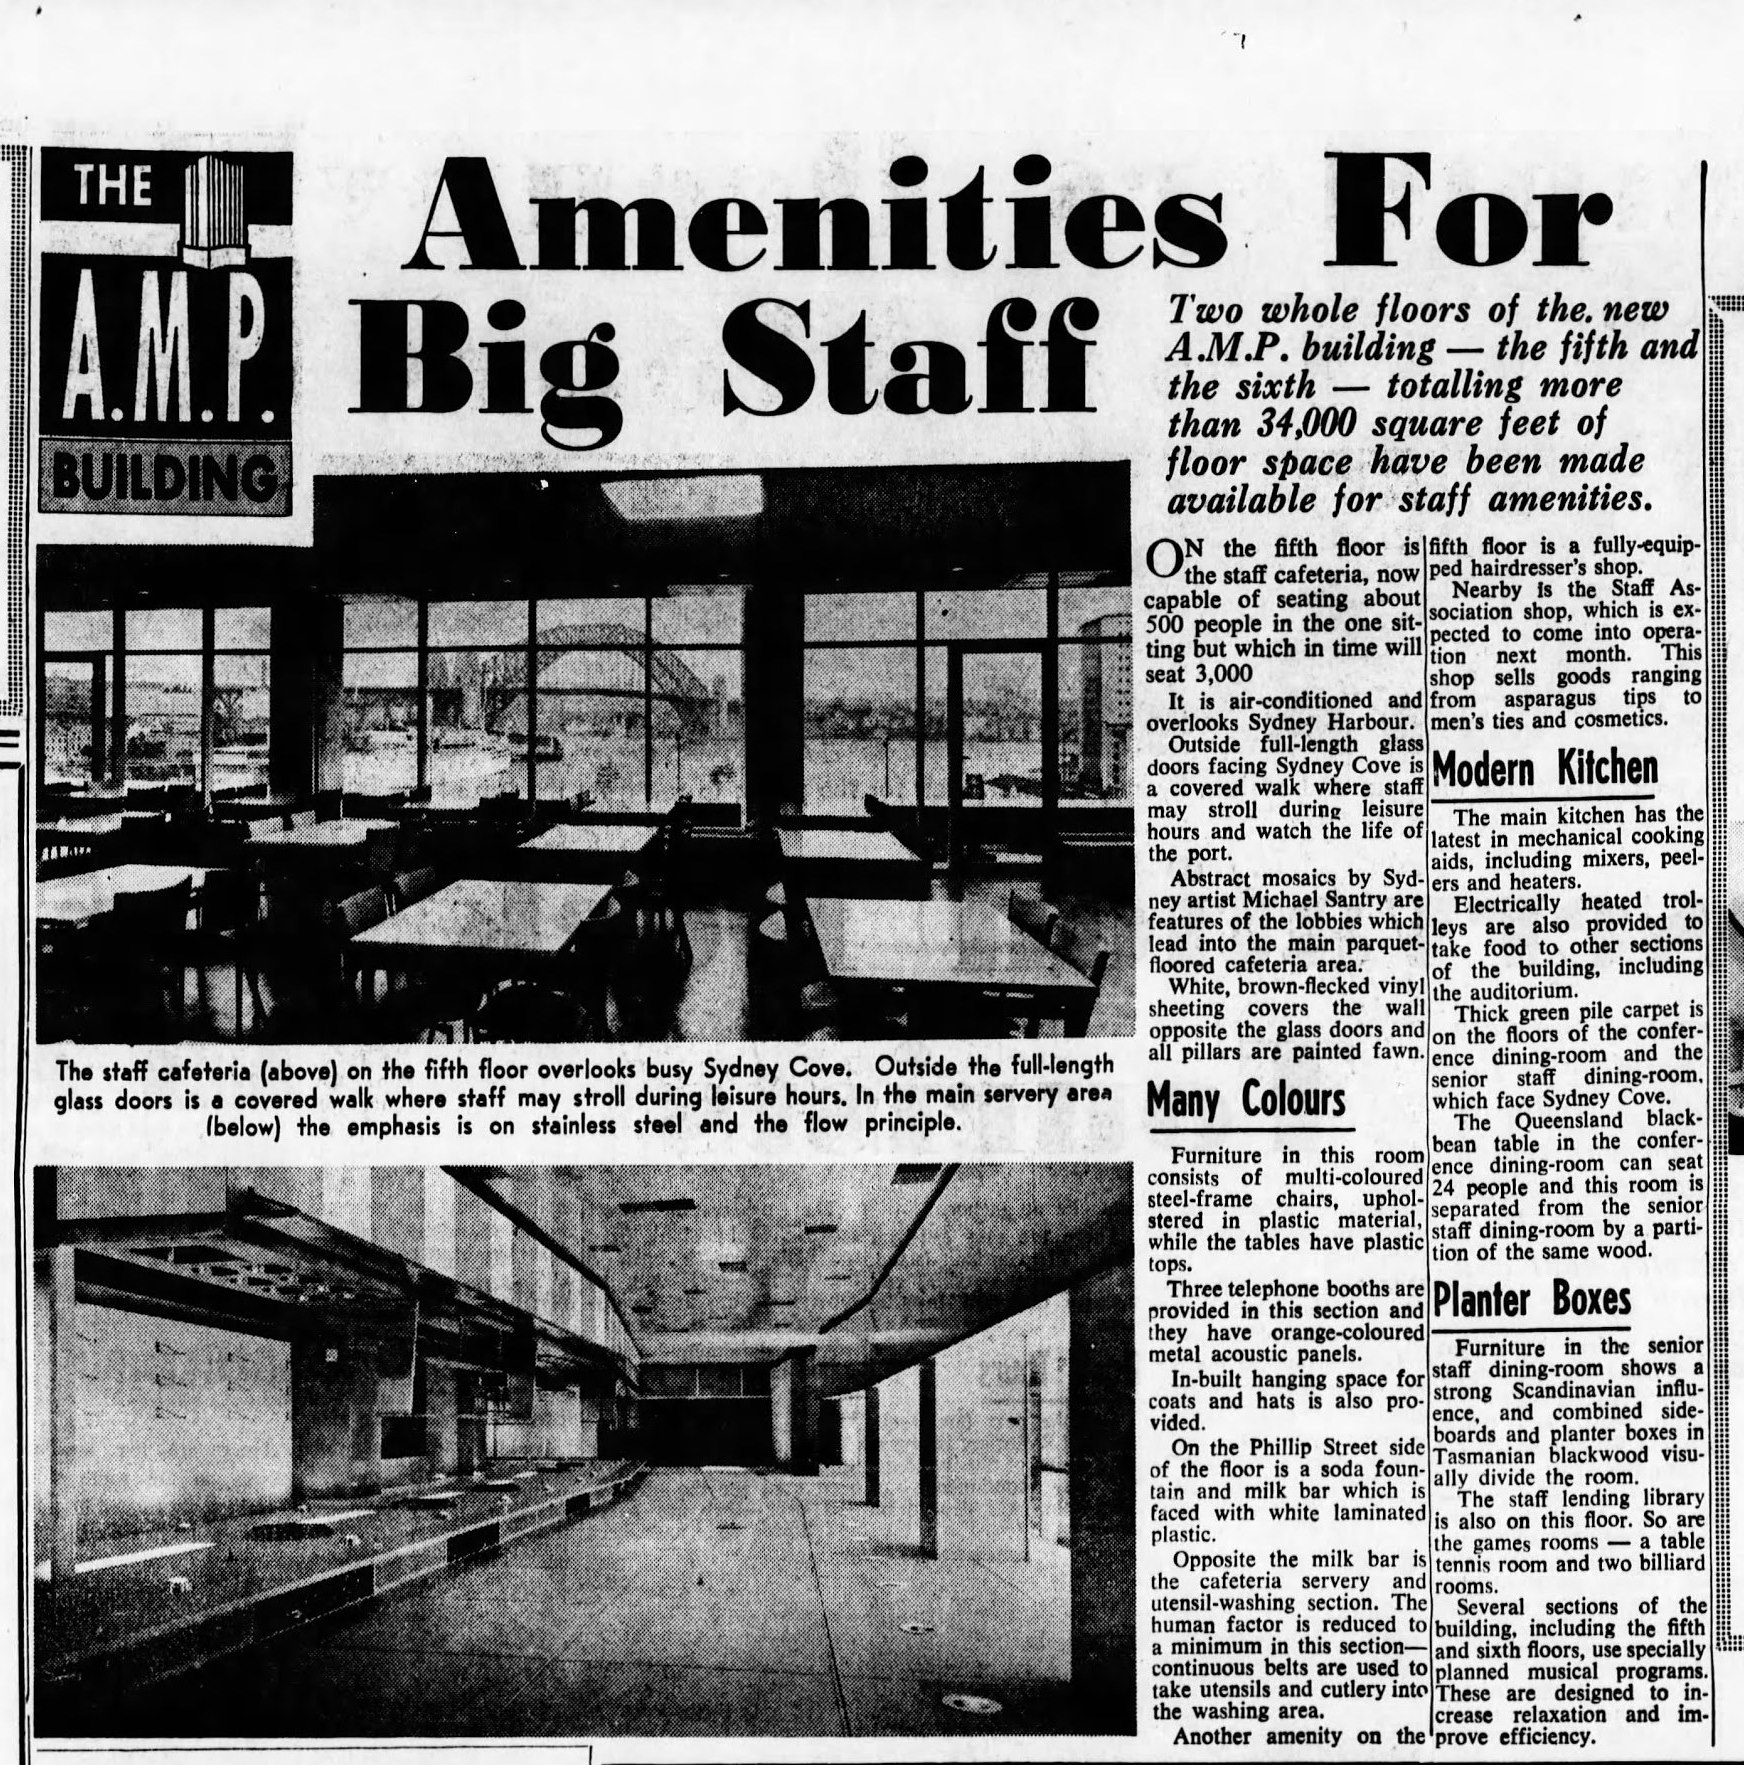 AMP Building Opening Supplement February 26 1962 SMH 9 - Cafeteria Feature